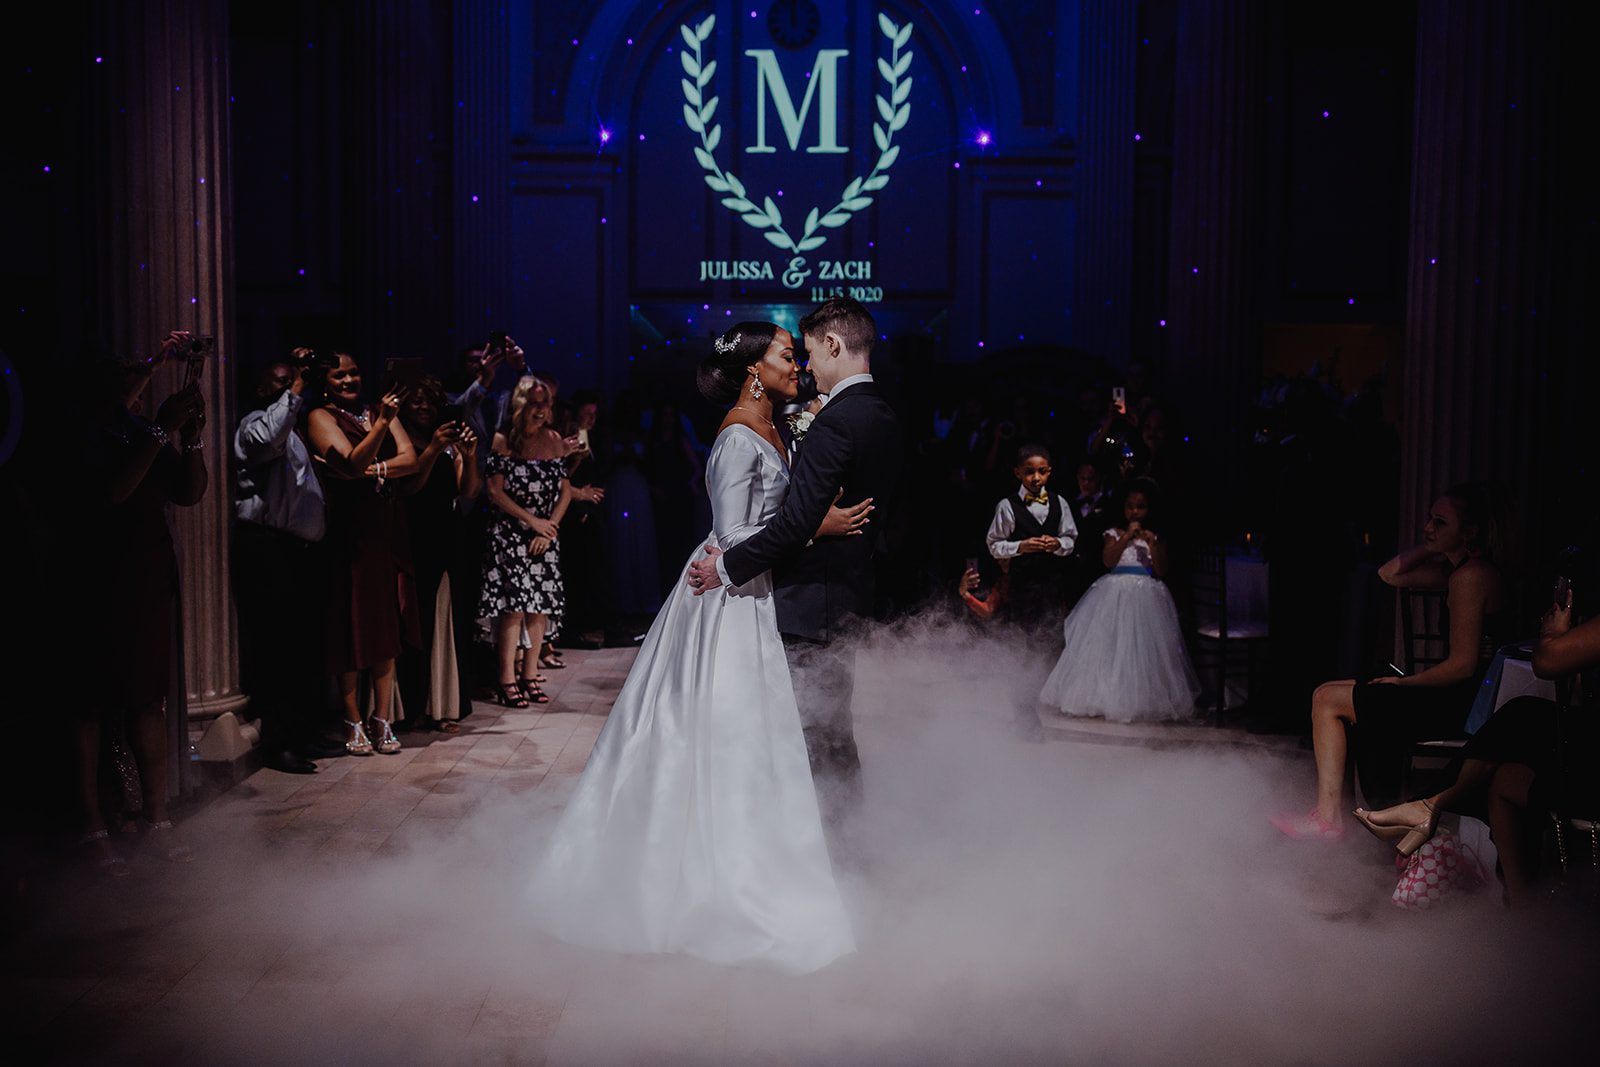 wedding first dance surrounded by fog looks like dancing on a cloud